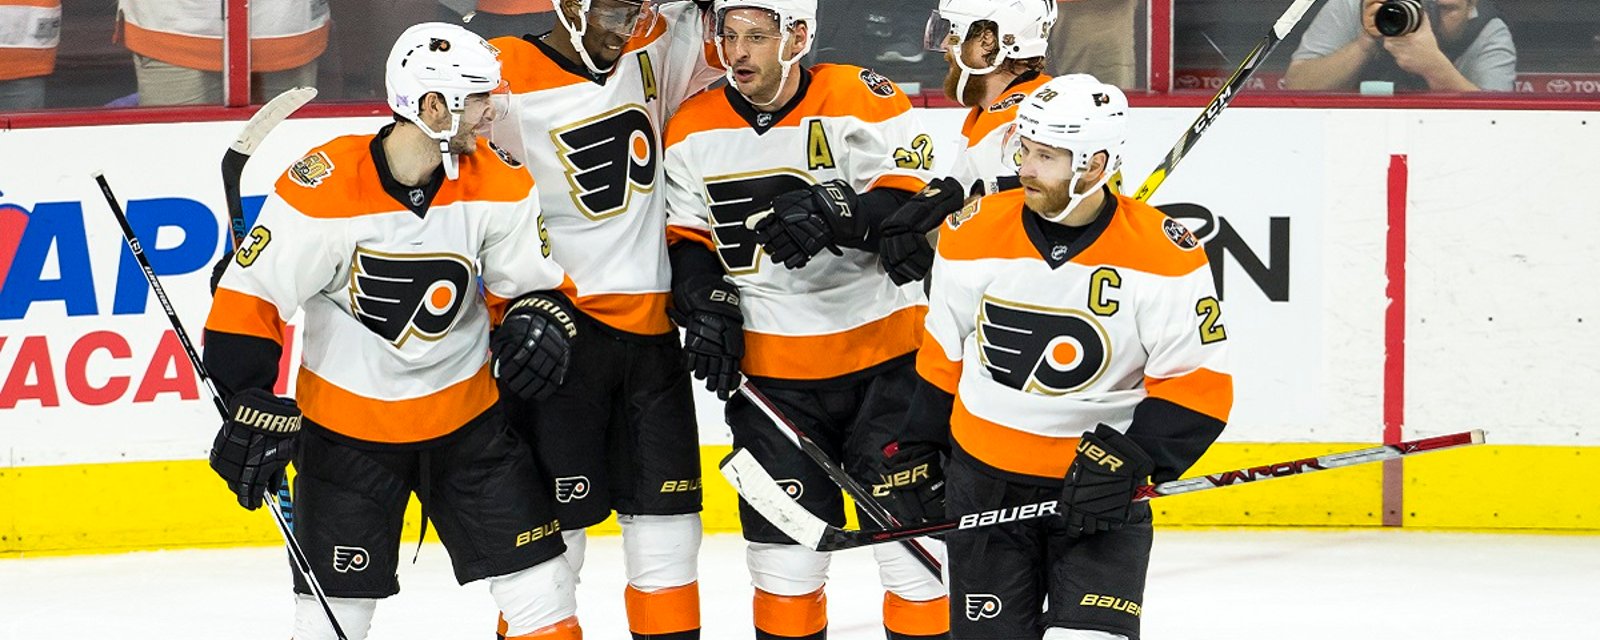 Breaking: Flyers surprisingly scratch one of their top stars ahead of tonight's game.